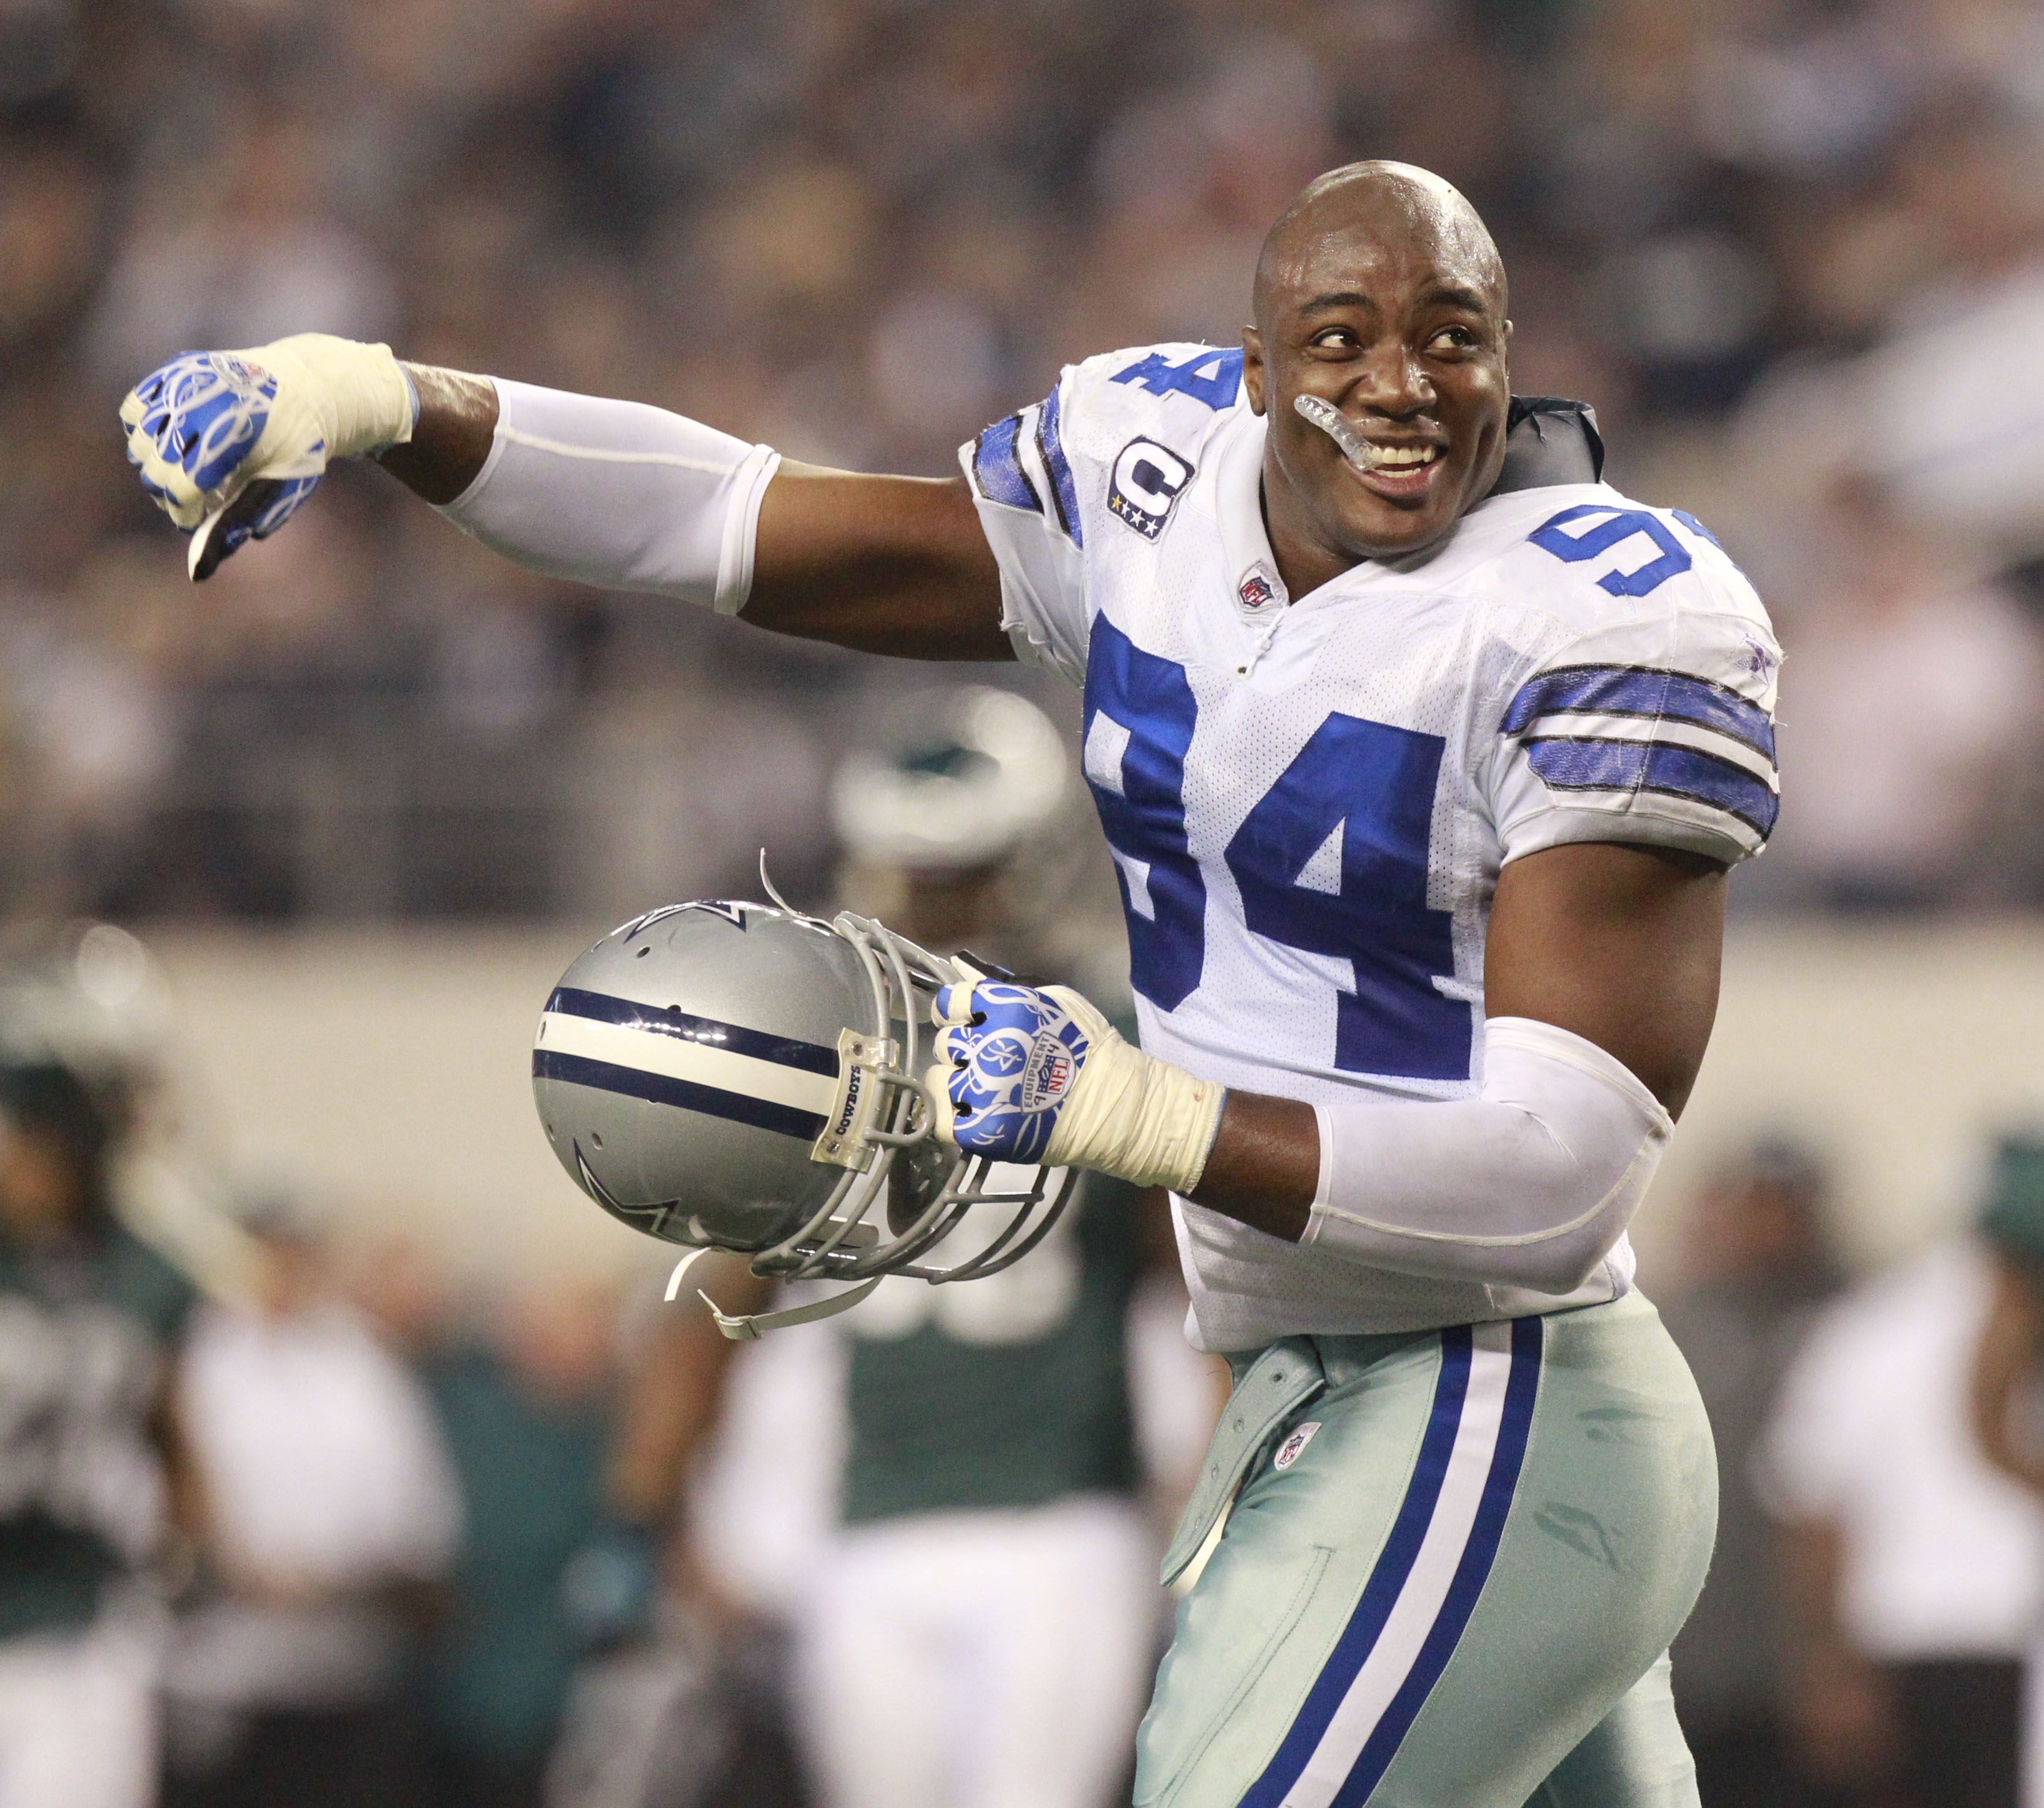 Free-agent analysis: DeMarcus Ware needs help, but would the